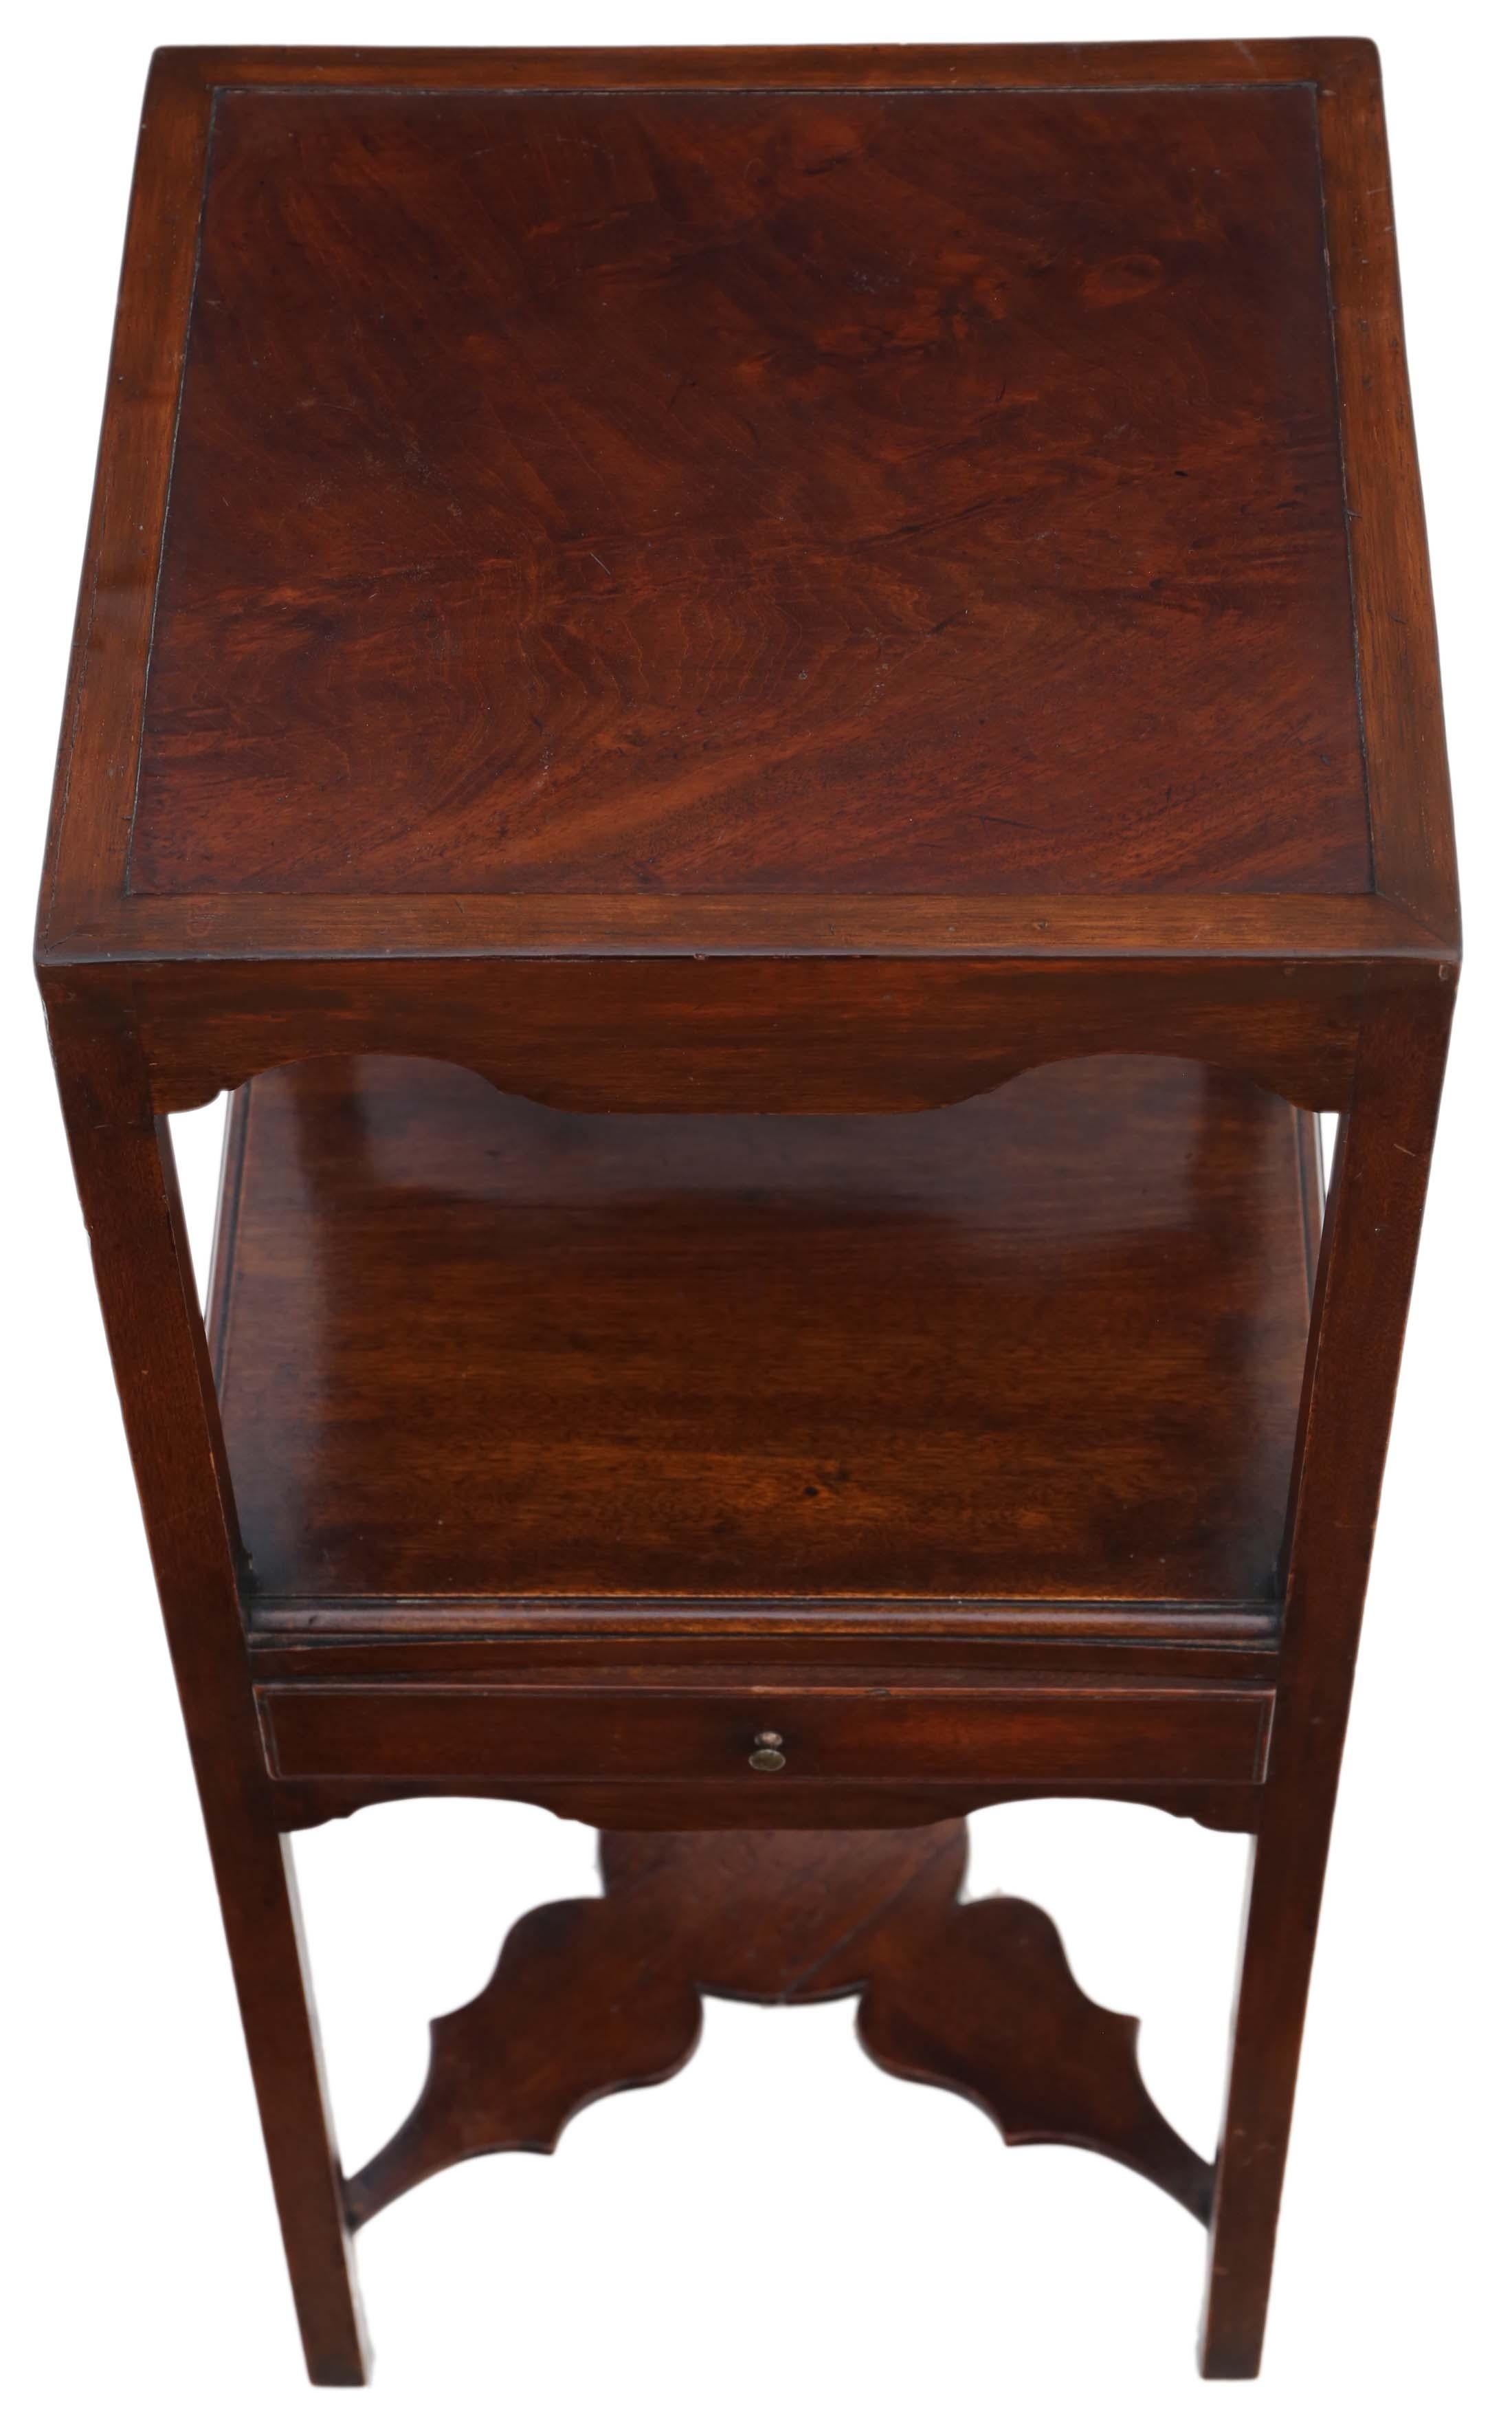 Antique quality Georgian circa 1810 inlaid mahogany washstand bedside table.

Great rare item, which is solid with no loose joints and no woodworm. The drawer slides freely.

Lovely age, color and patina.

Measures: 33cm wide x 33cm deep x